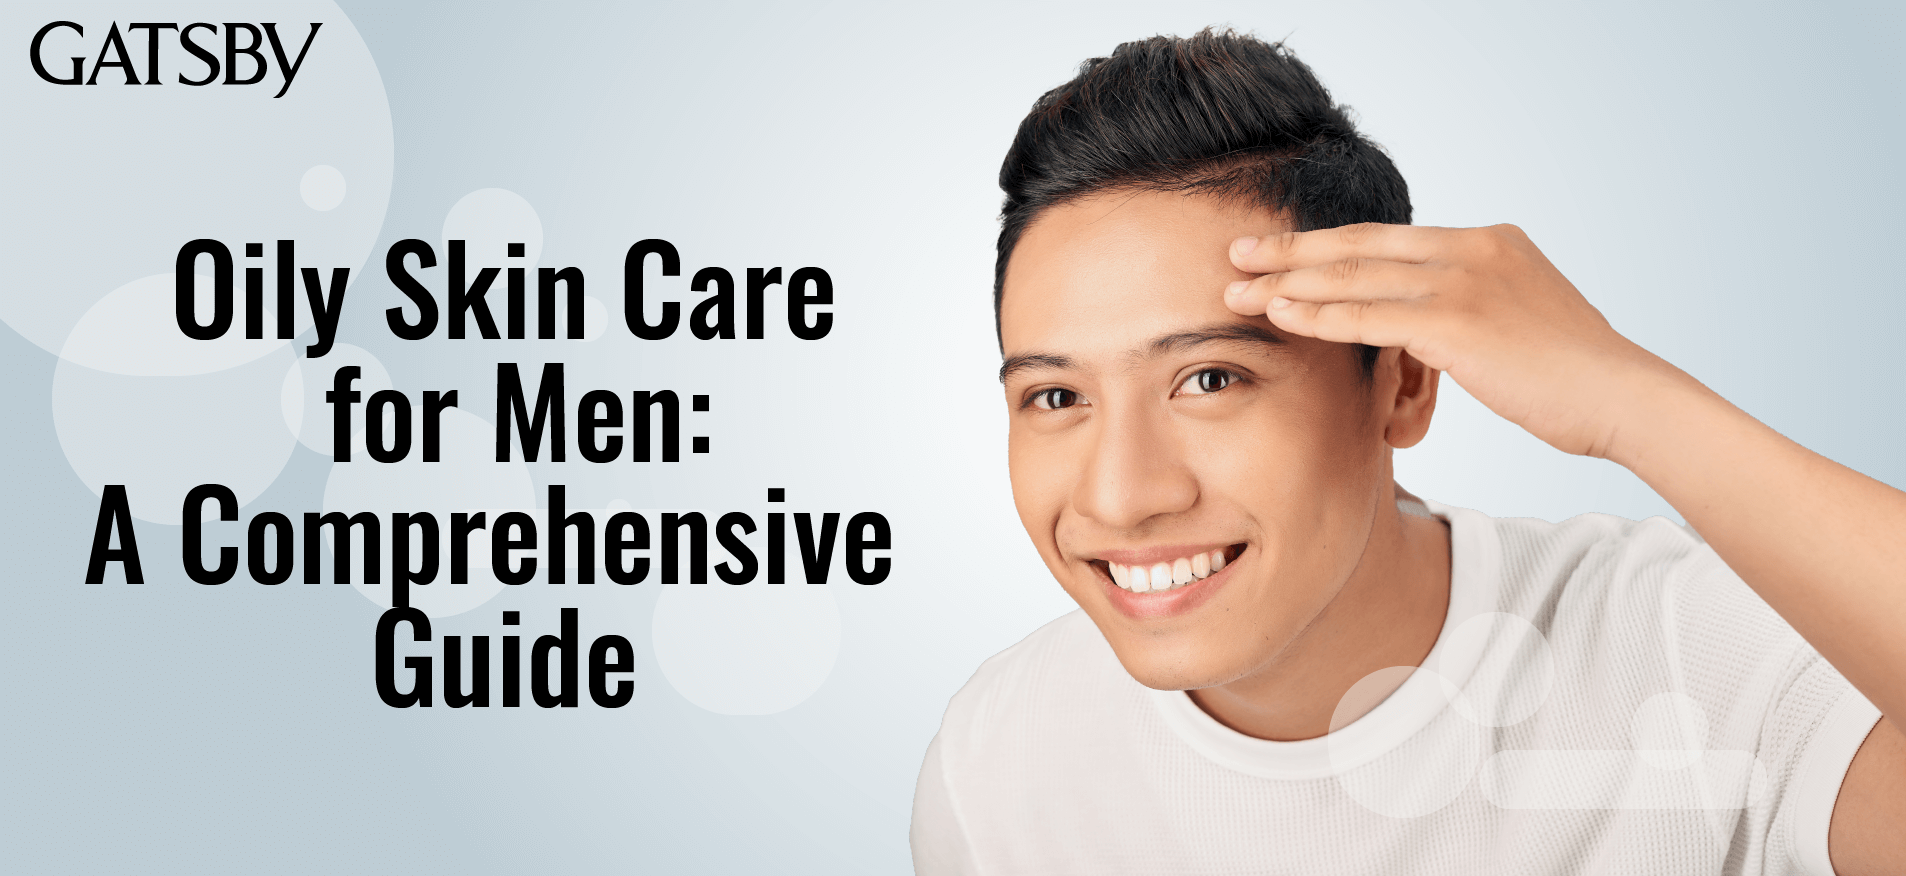 Men's Guide To Perfect Hair Style By GATSBY |